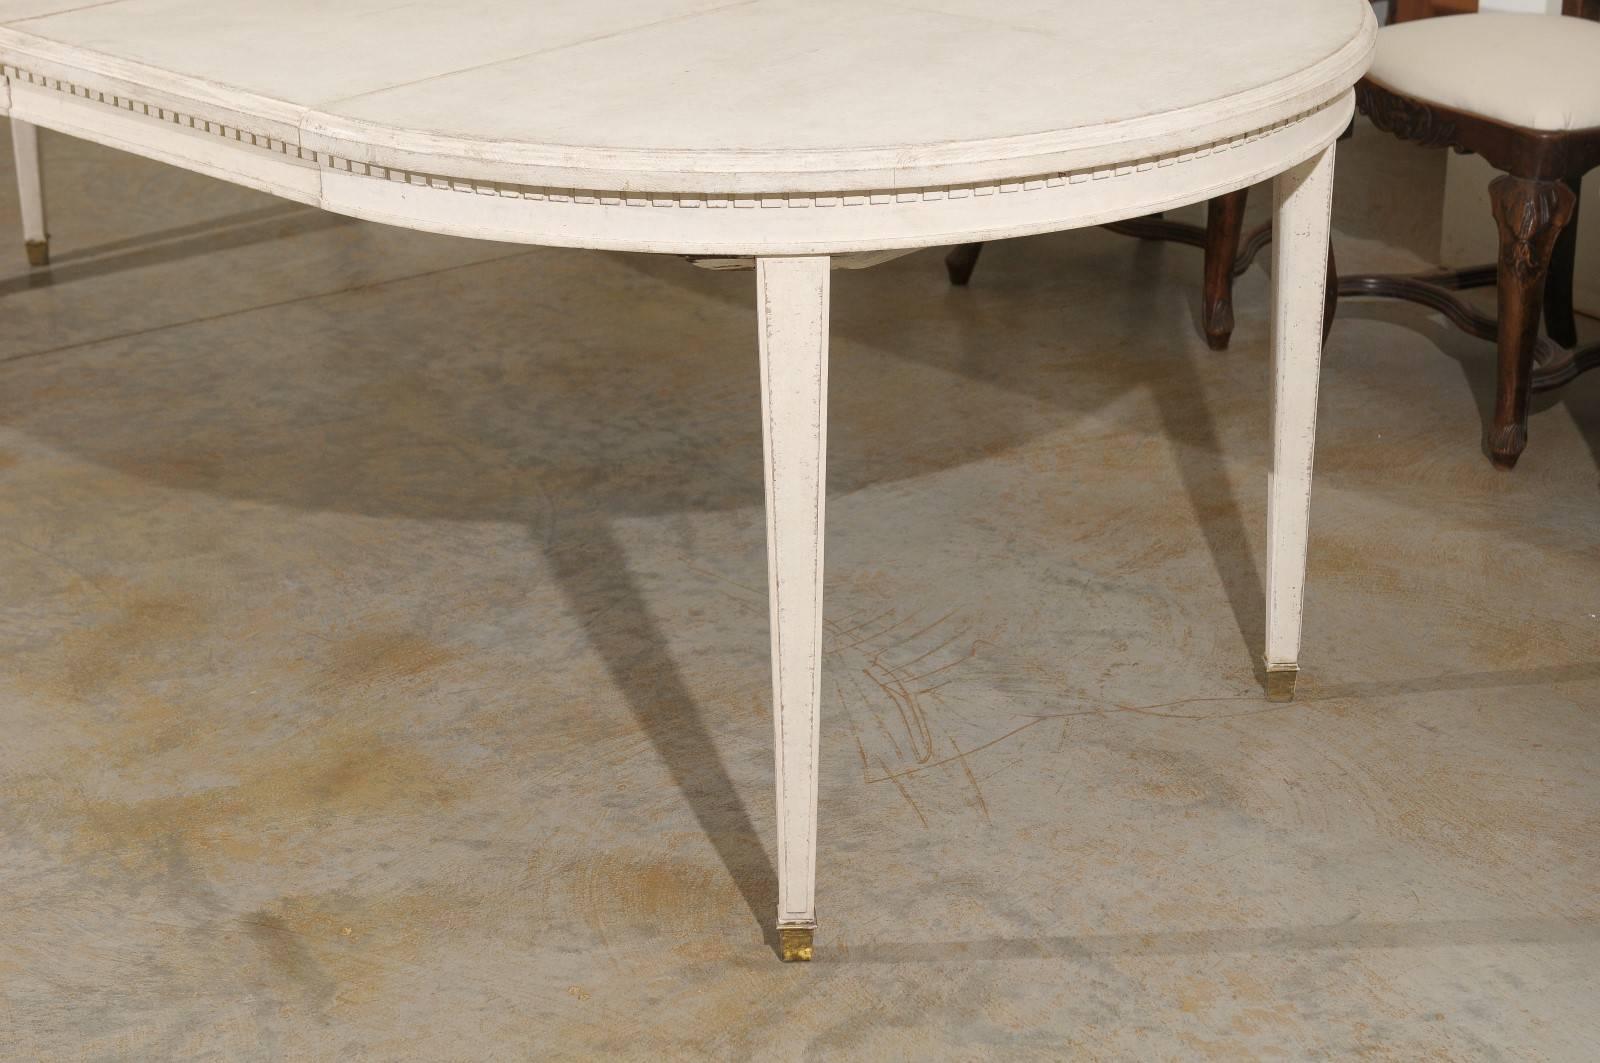 Brass Swedish Gustavian Style Oval Dining Room Table with Extensions and Tapered Legs